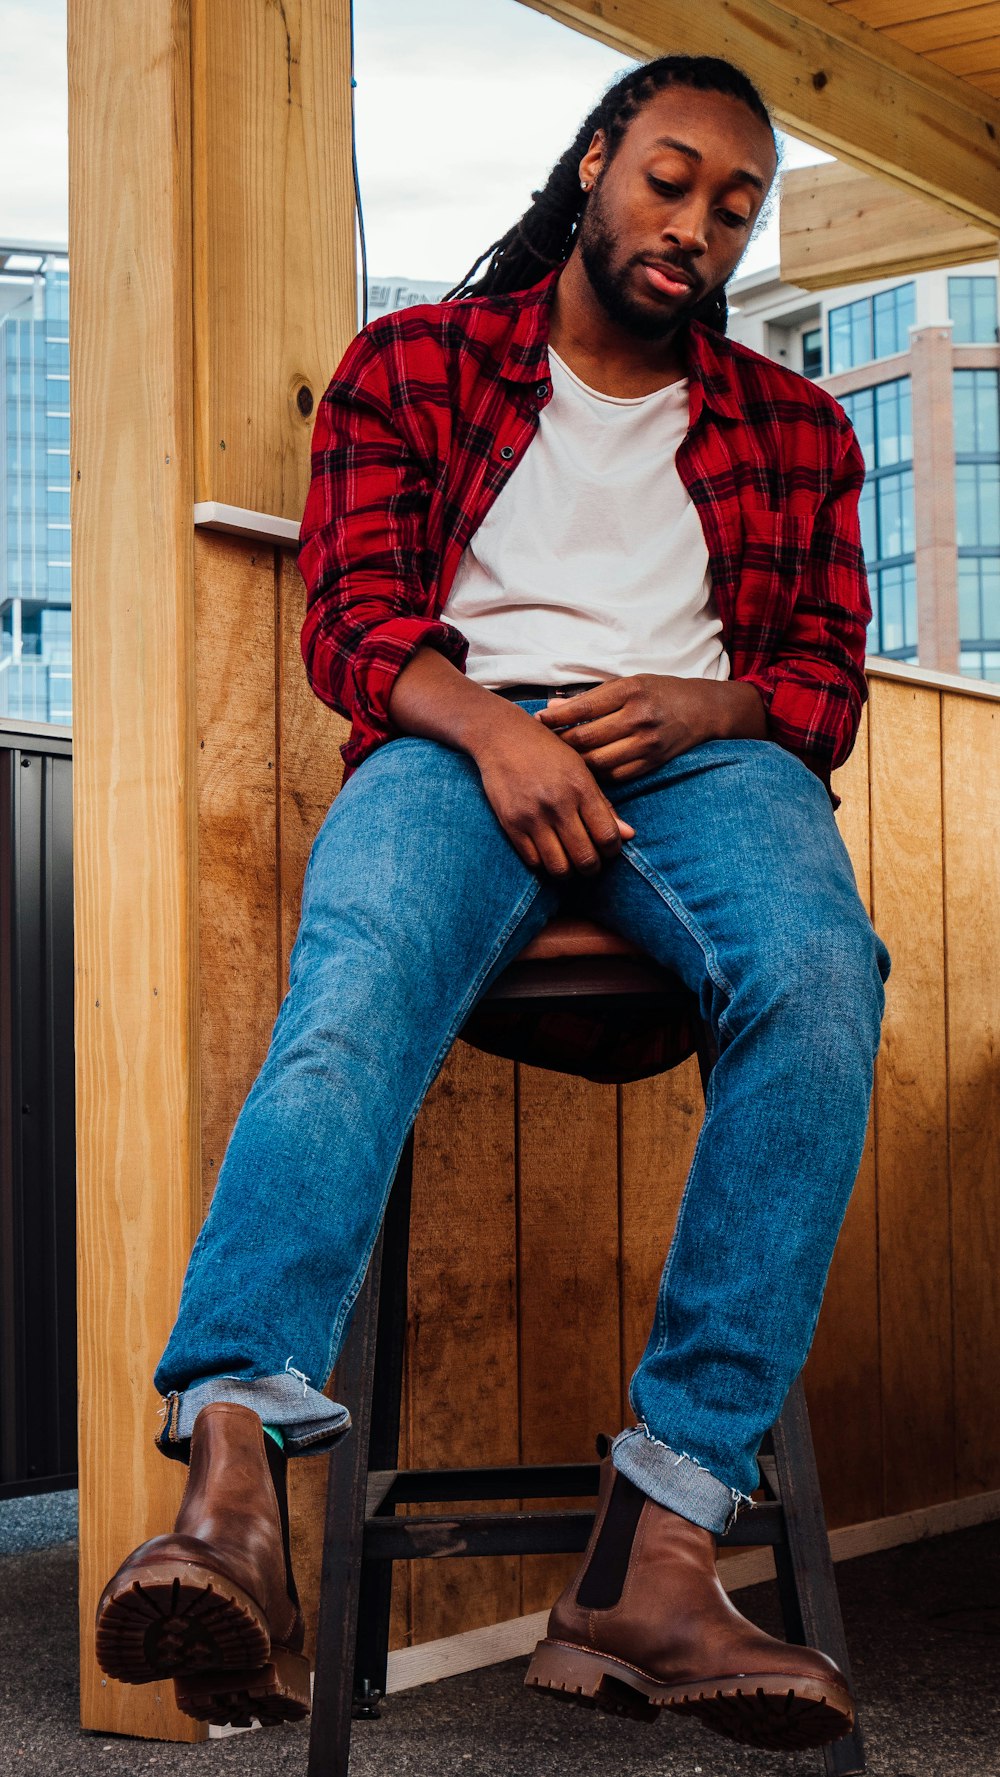 man in red and white plaid dress shirt and blue denim jeans sitting on brown wooden